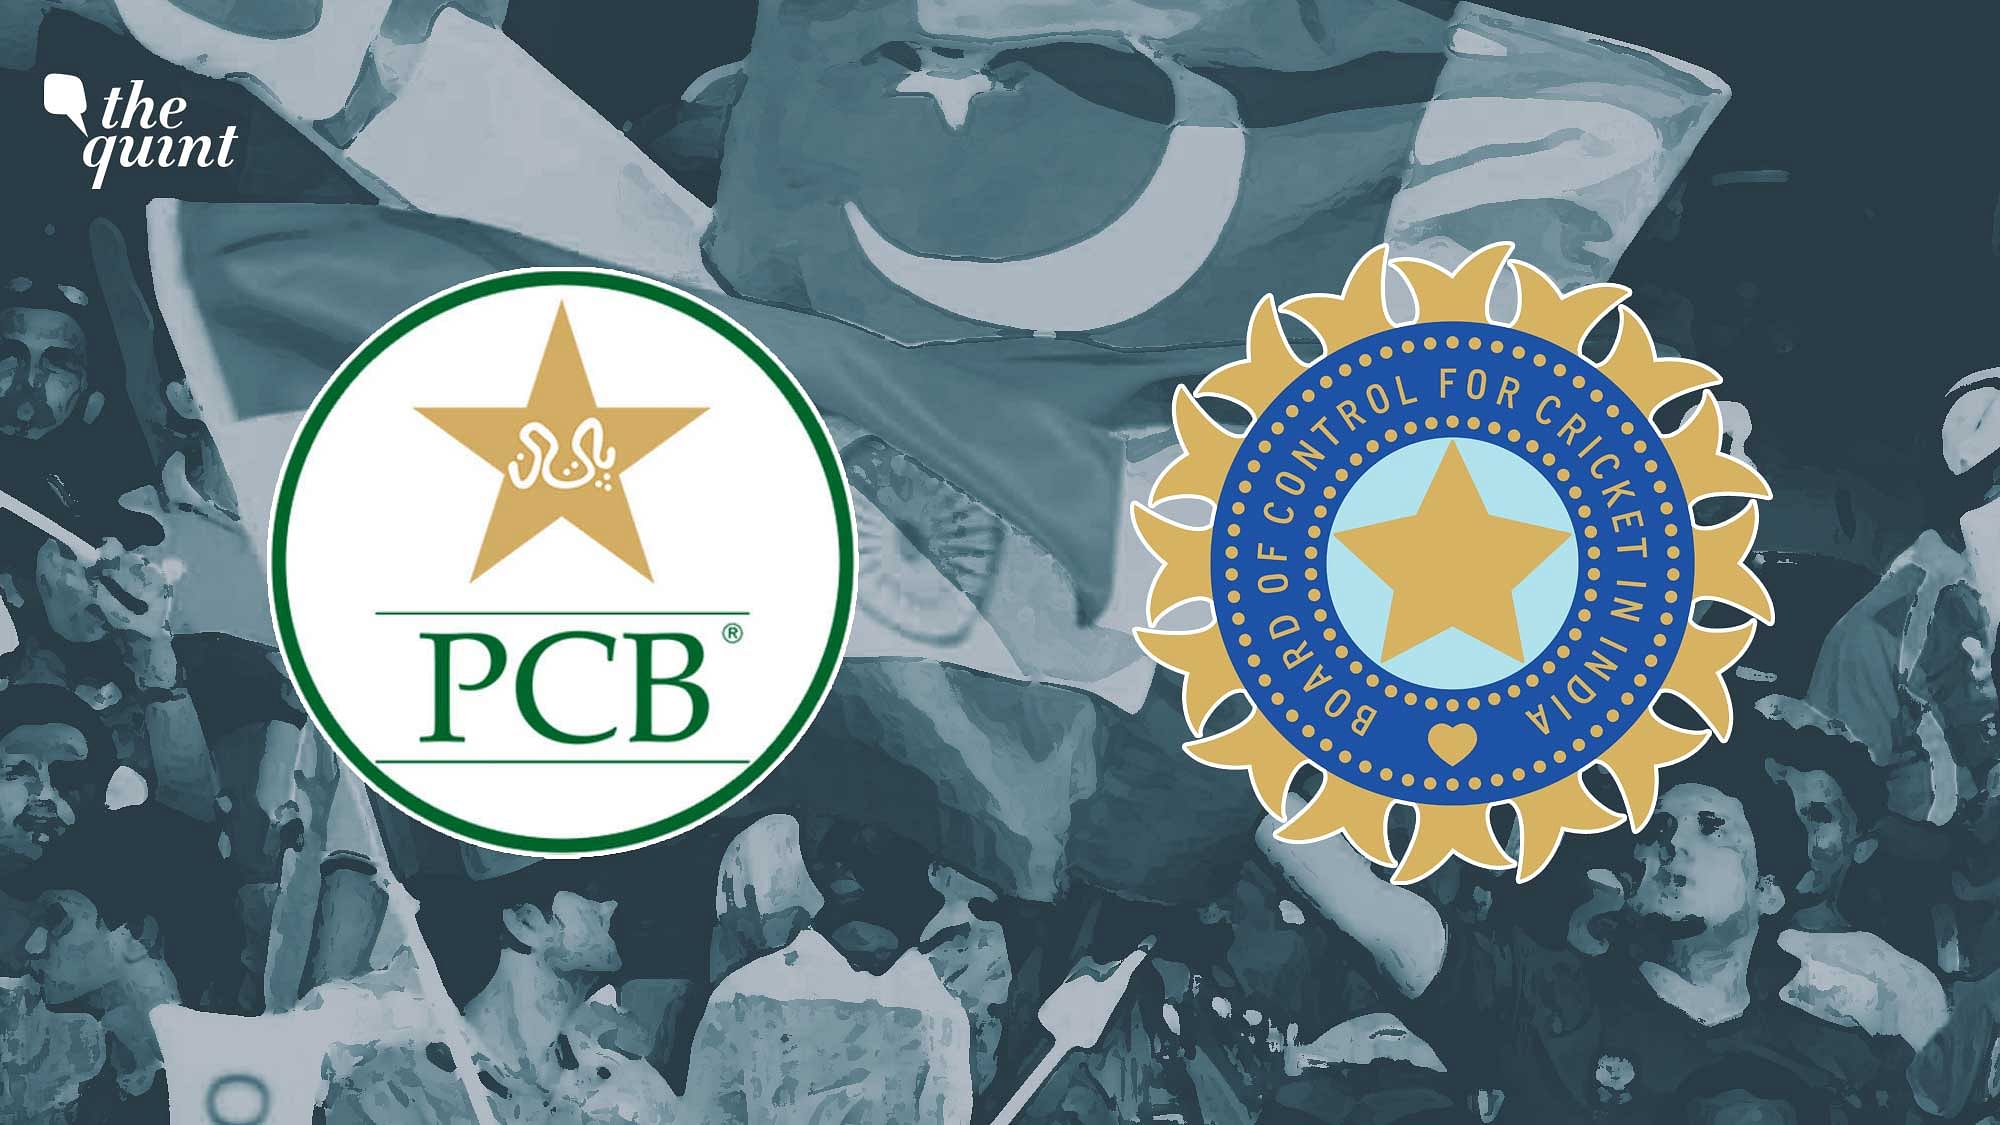 Will India and Pakistan’s cricket rivalry just remain a folklore for this generation of cricket fans?